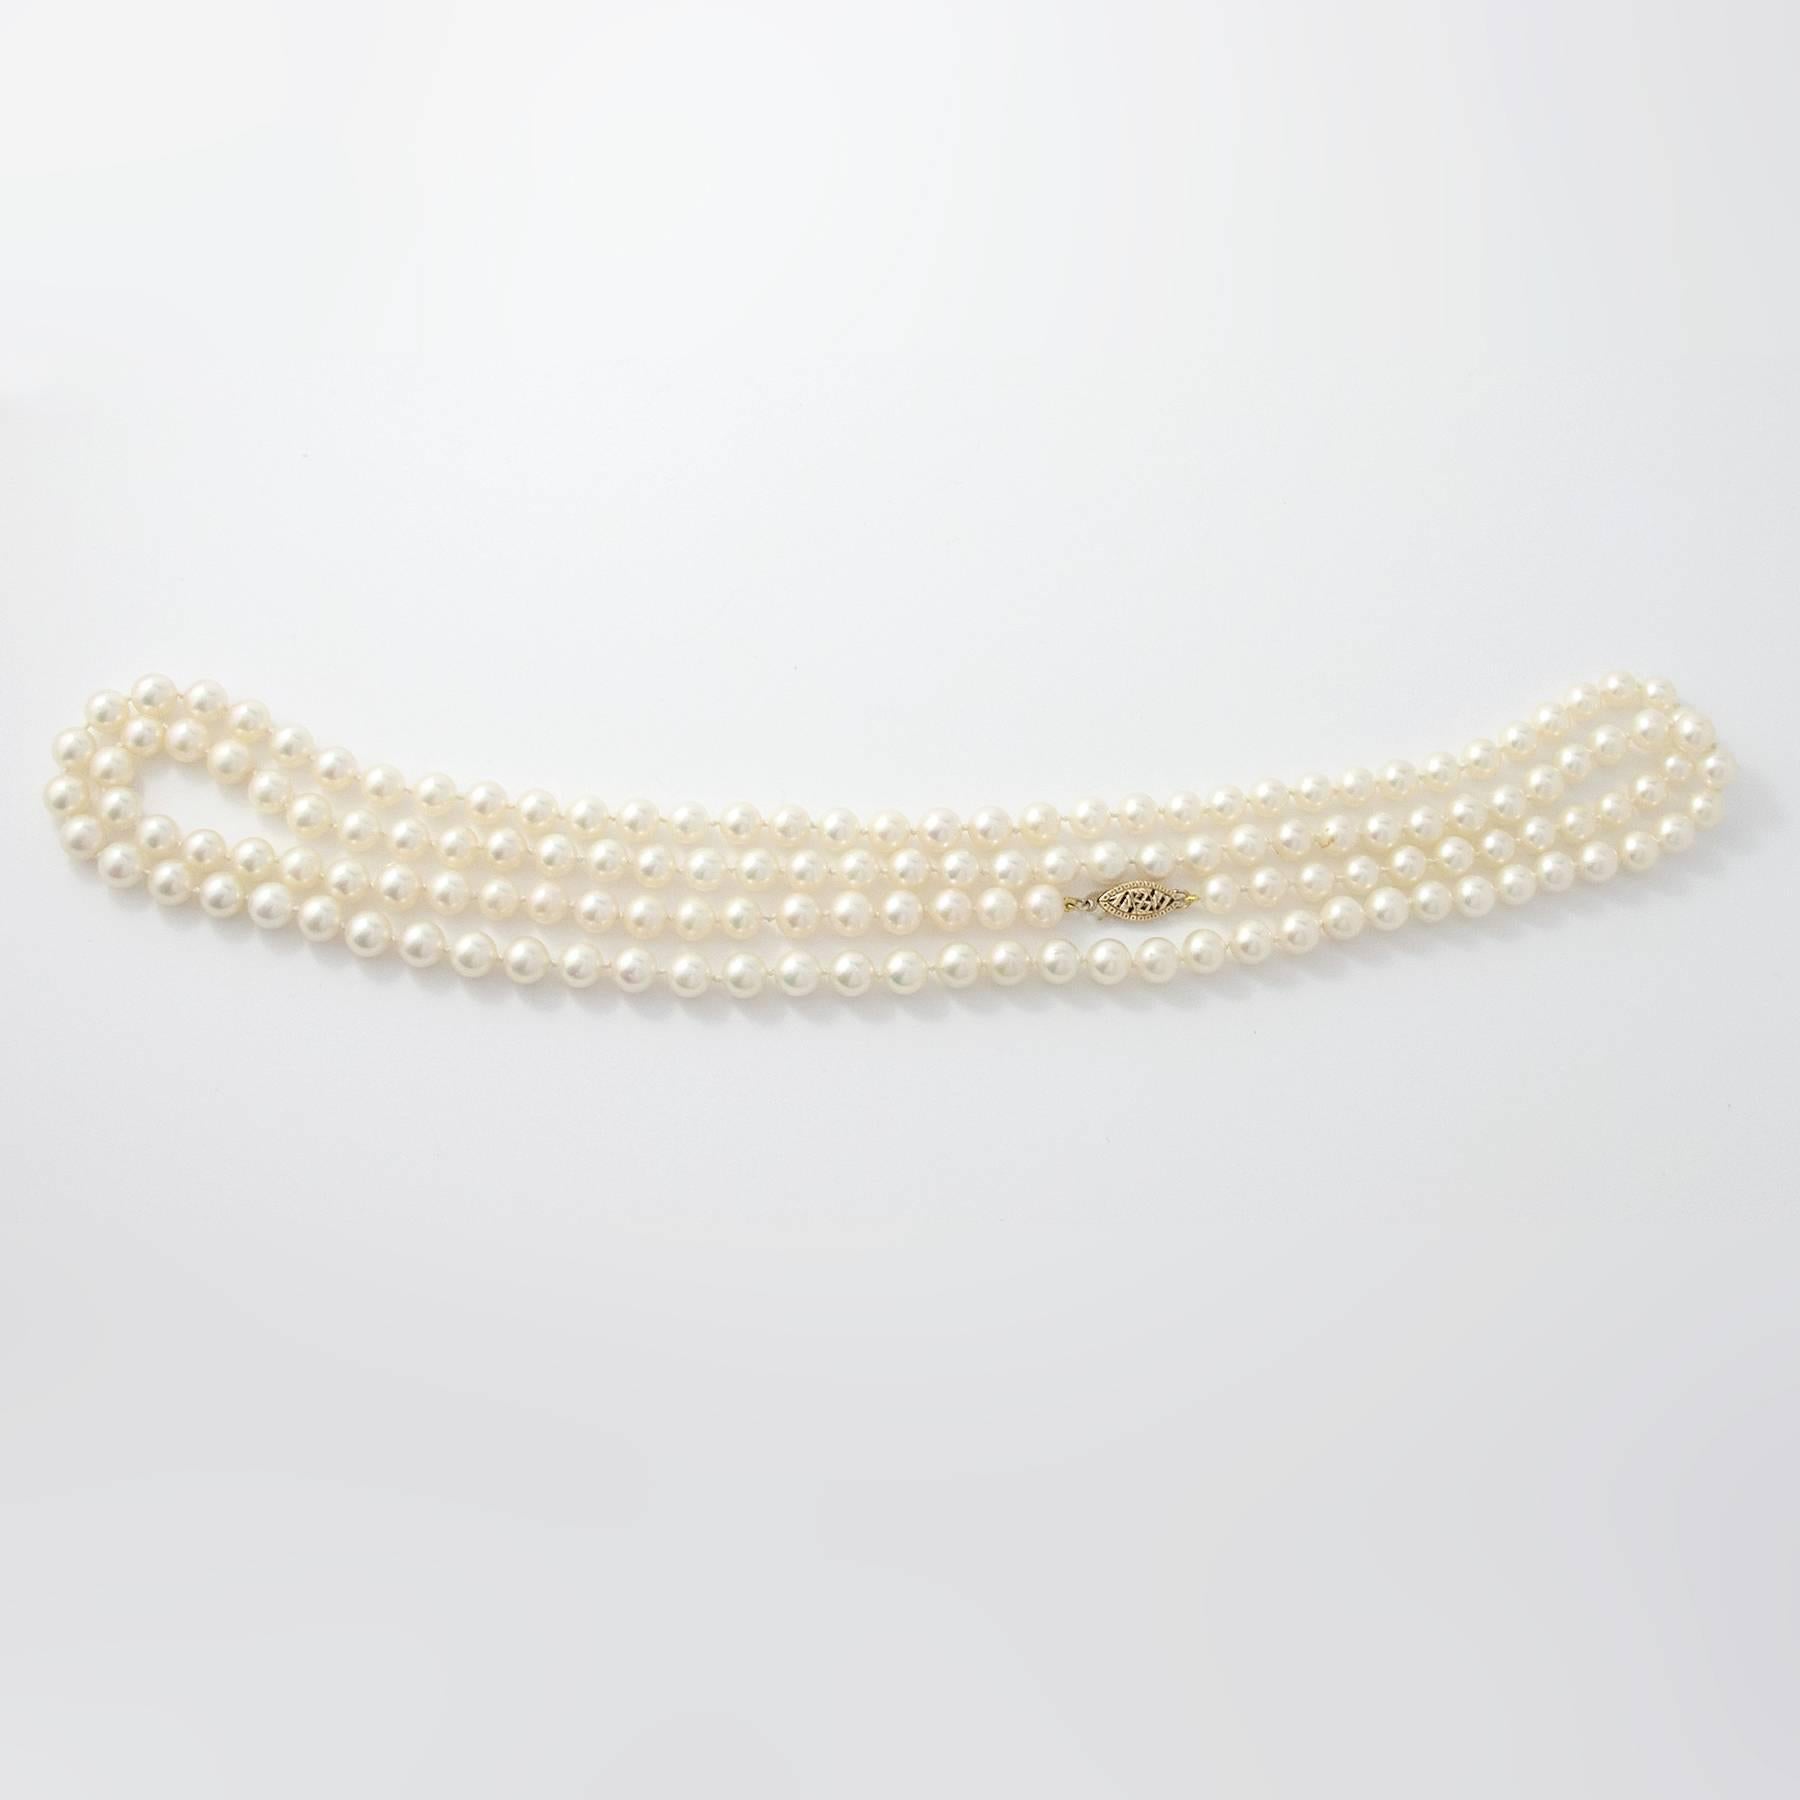 Fine Japanese Akoya Pearl Necklace In Excellent Condition For Sale In Toronto, Ontario